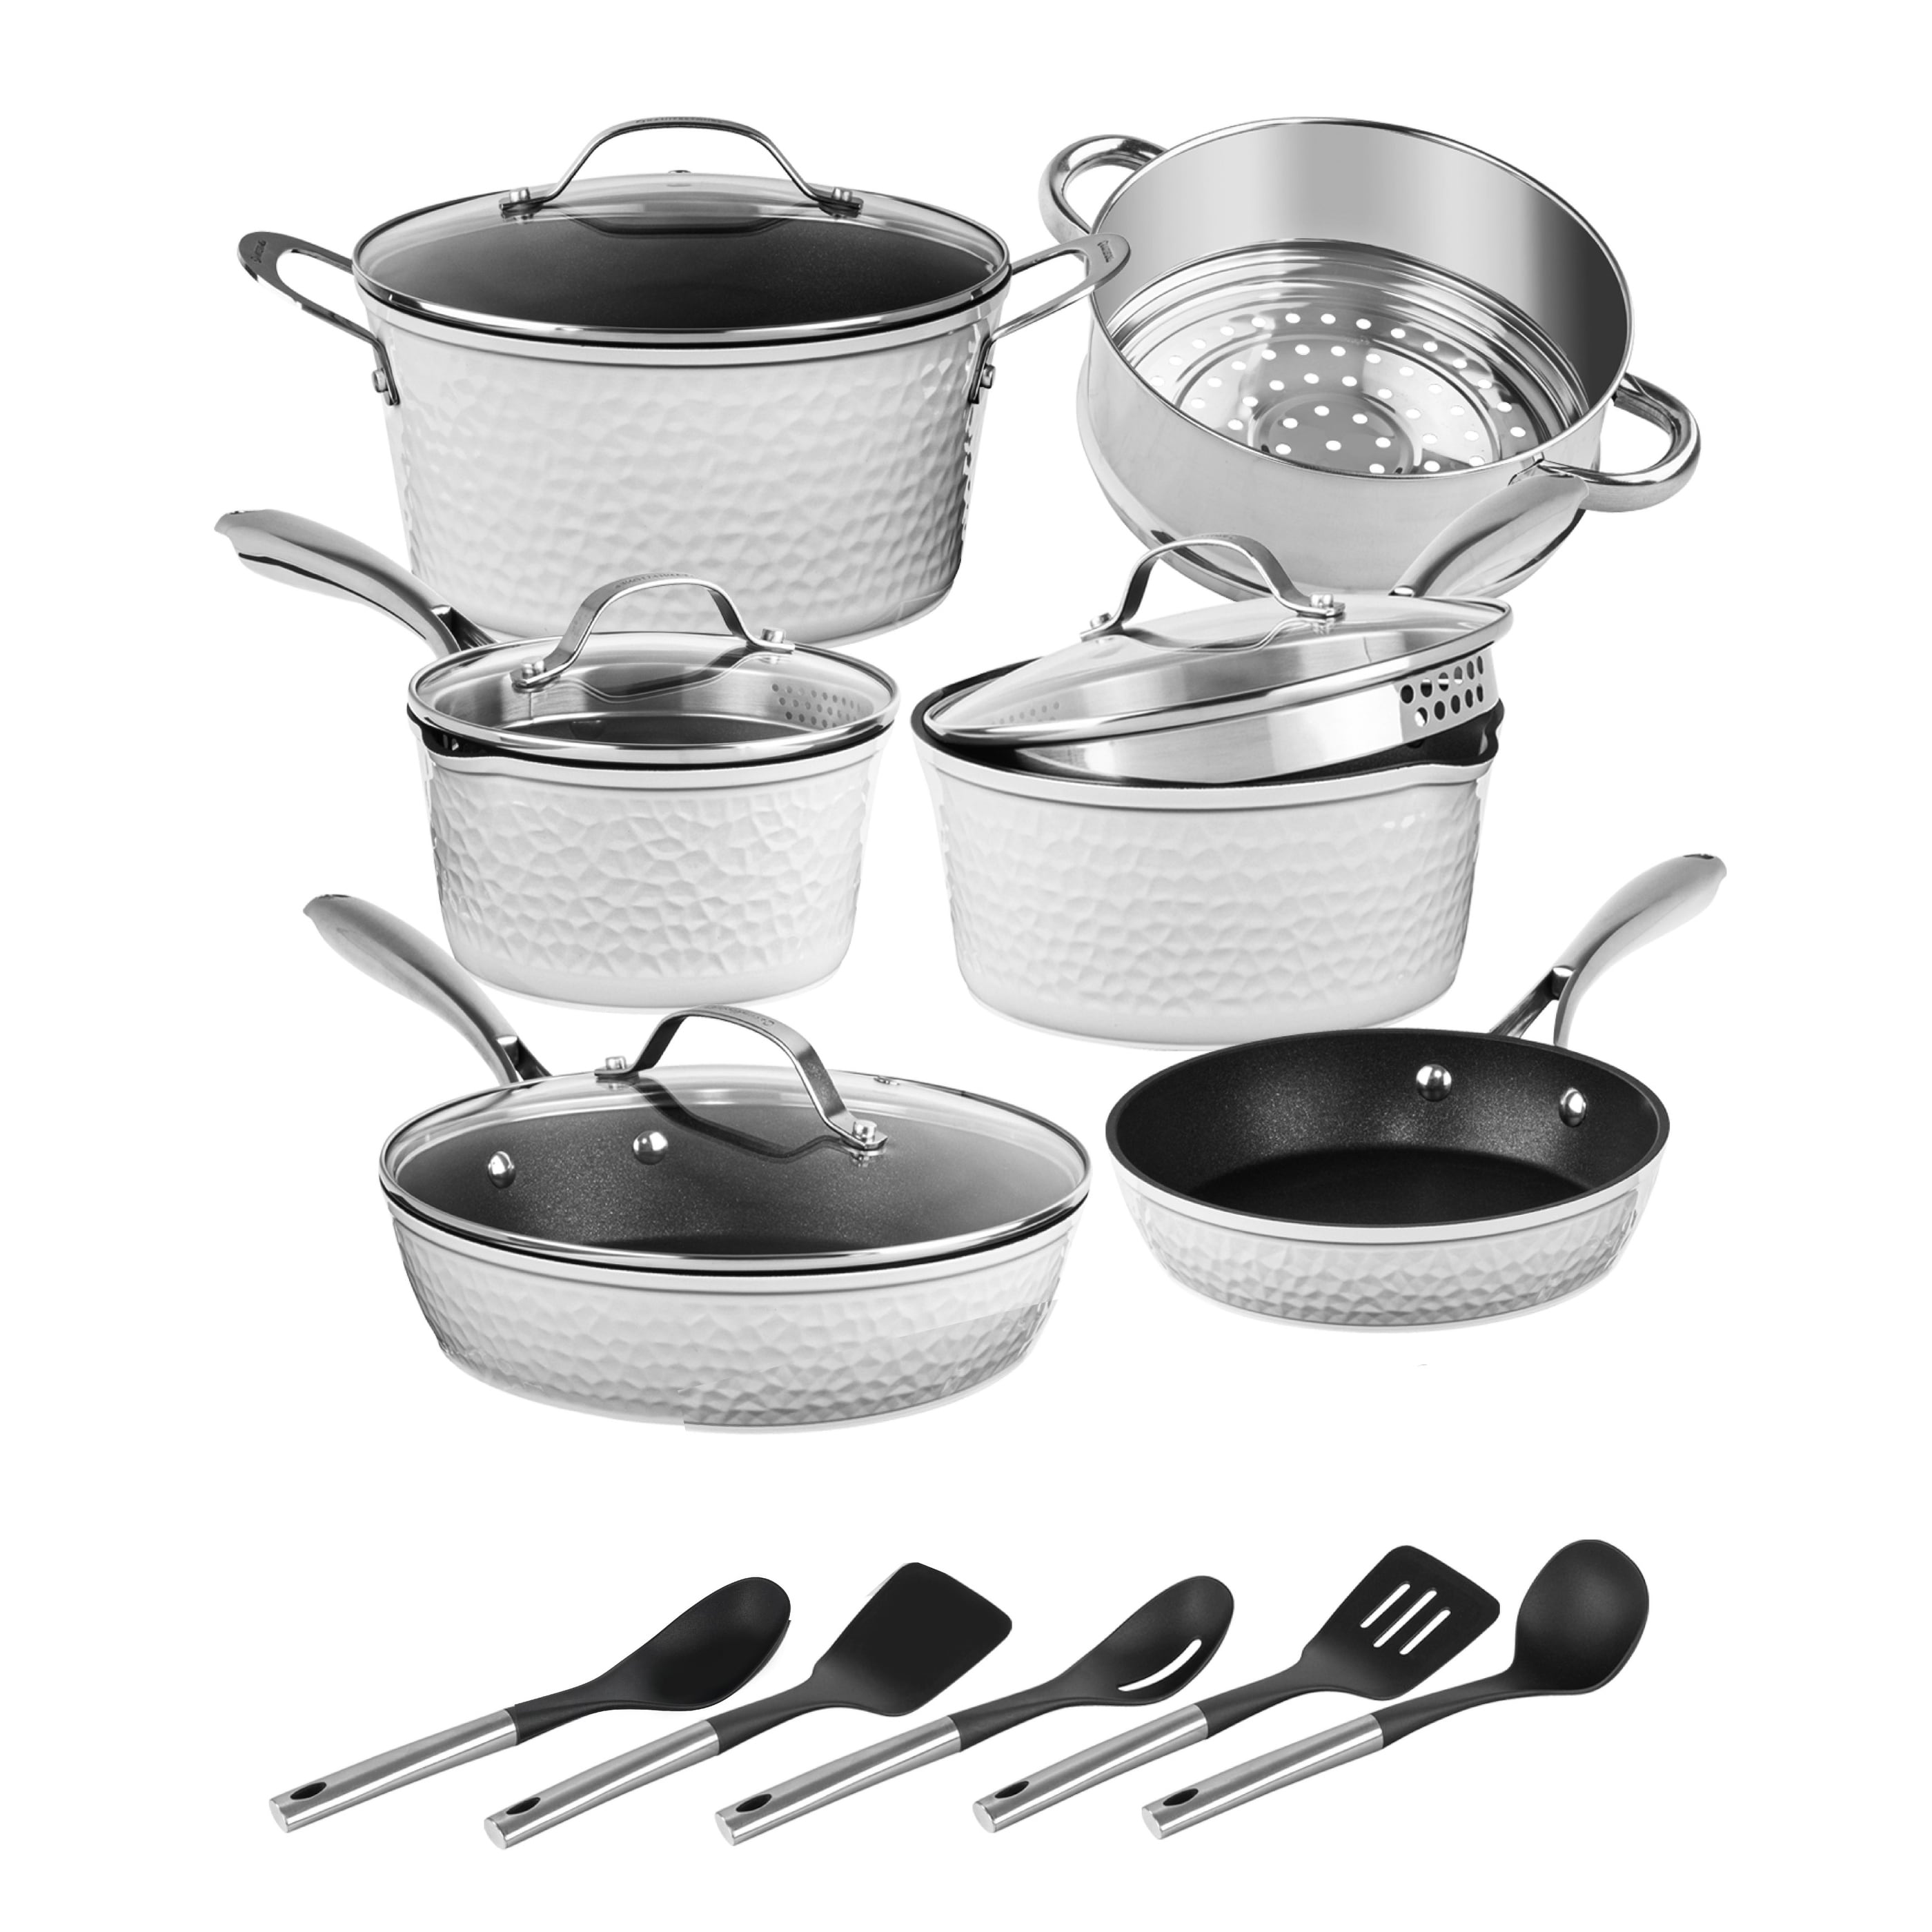 https://ak1.ostkcdn.com/images/products/is/images/direct/e07e8054ede5dee6dab77480eb3149429ea8fa16/Granitestone-Charleston-Hammered-15-Piece-Nonstick-Cookware-Set.jpg